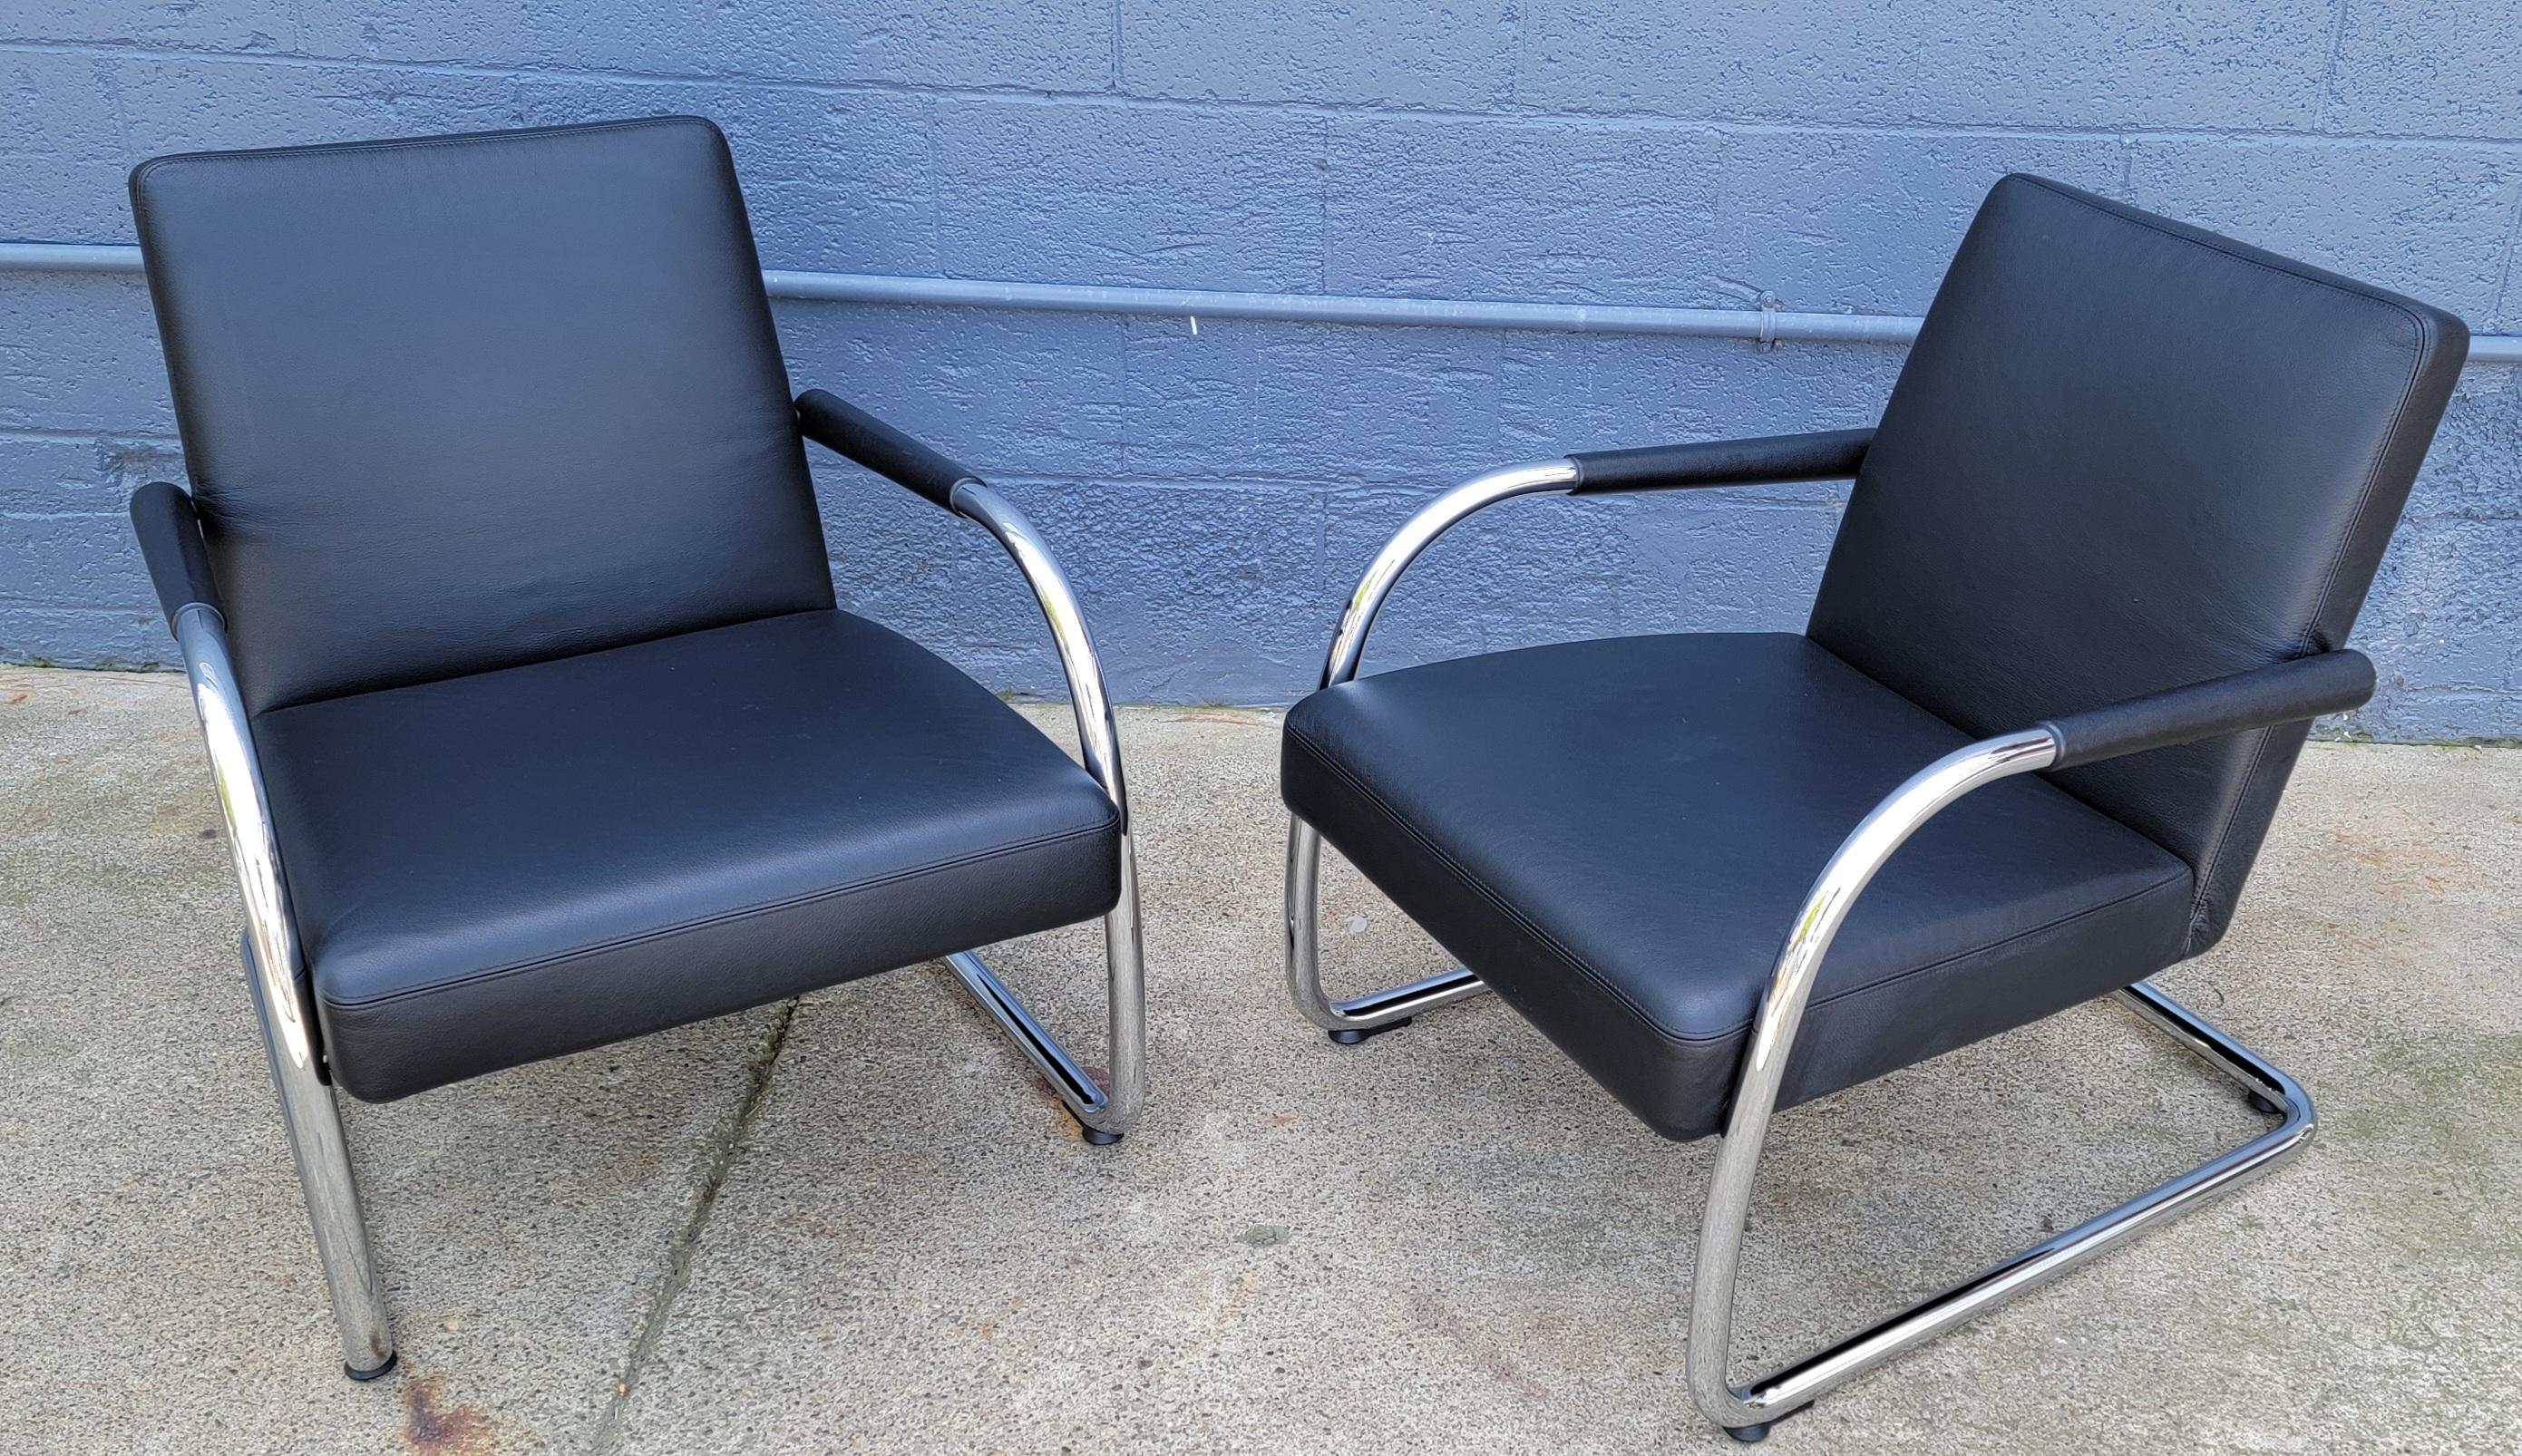 A pair of cantilevered tubular steel chrome and leather lounge chairs designed by Antonio Citterio for Vitra, Italy. Fine original condition with very minor signs of use. Polished chrome frames with black leather upholstery. Retain Vitra labels.